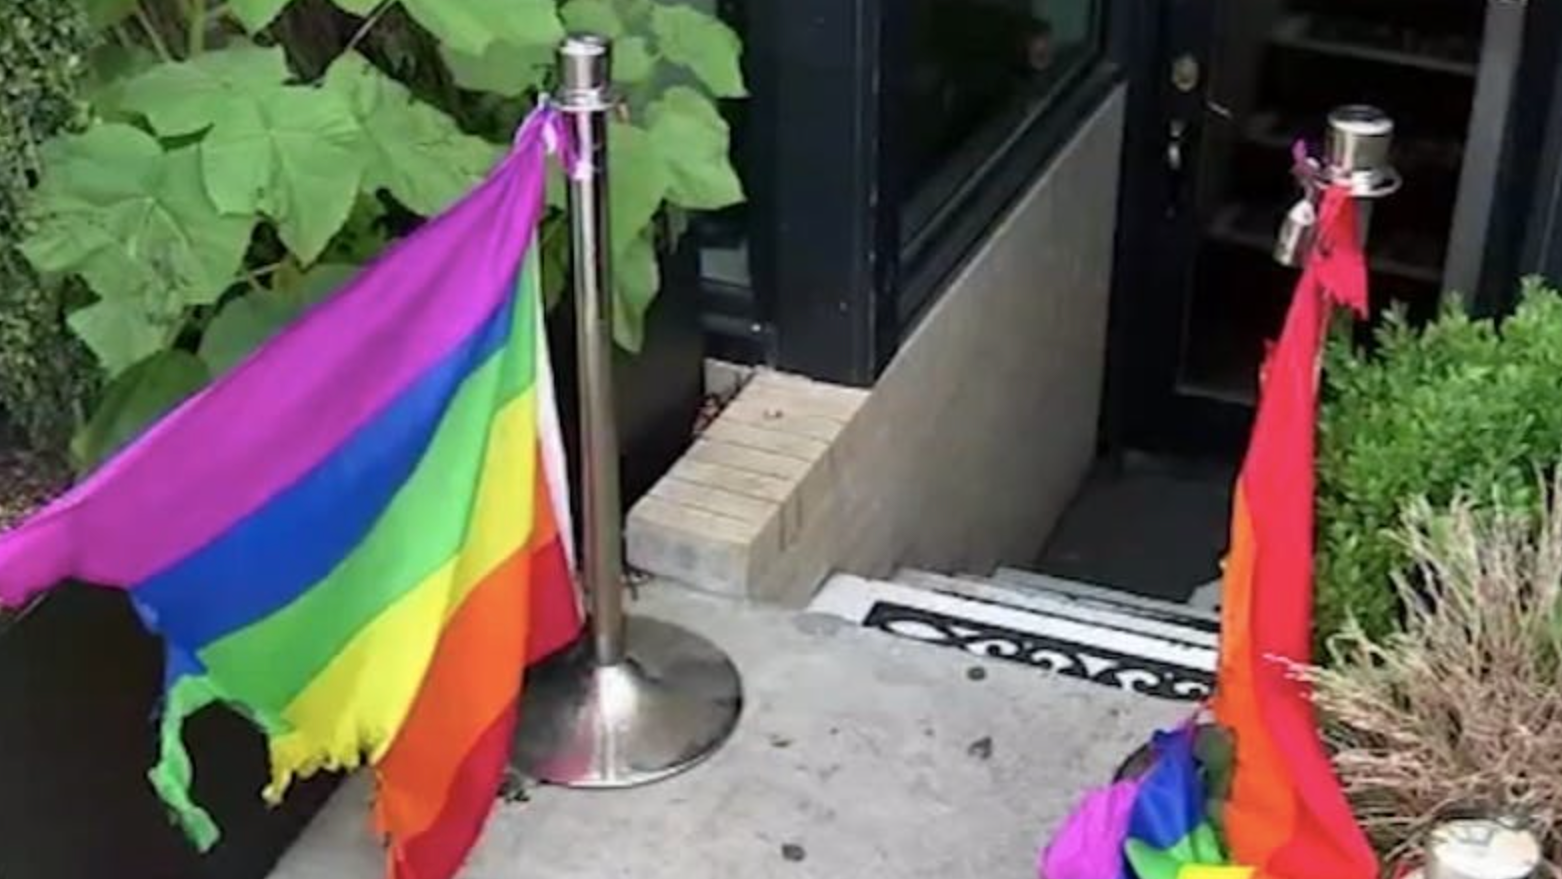 Rainbow flags set on fire outside LGBTI bar in New York City